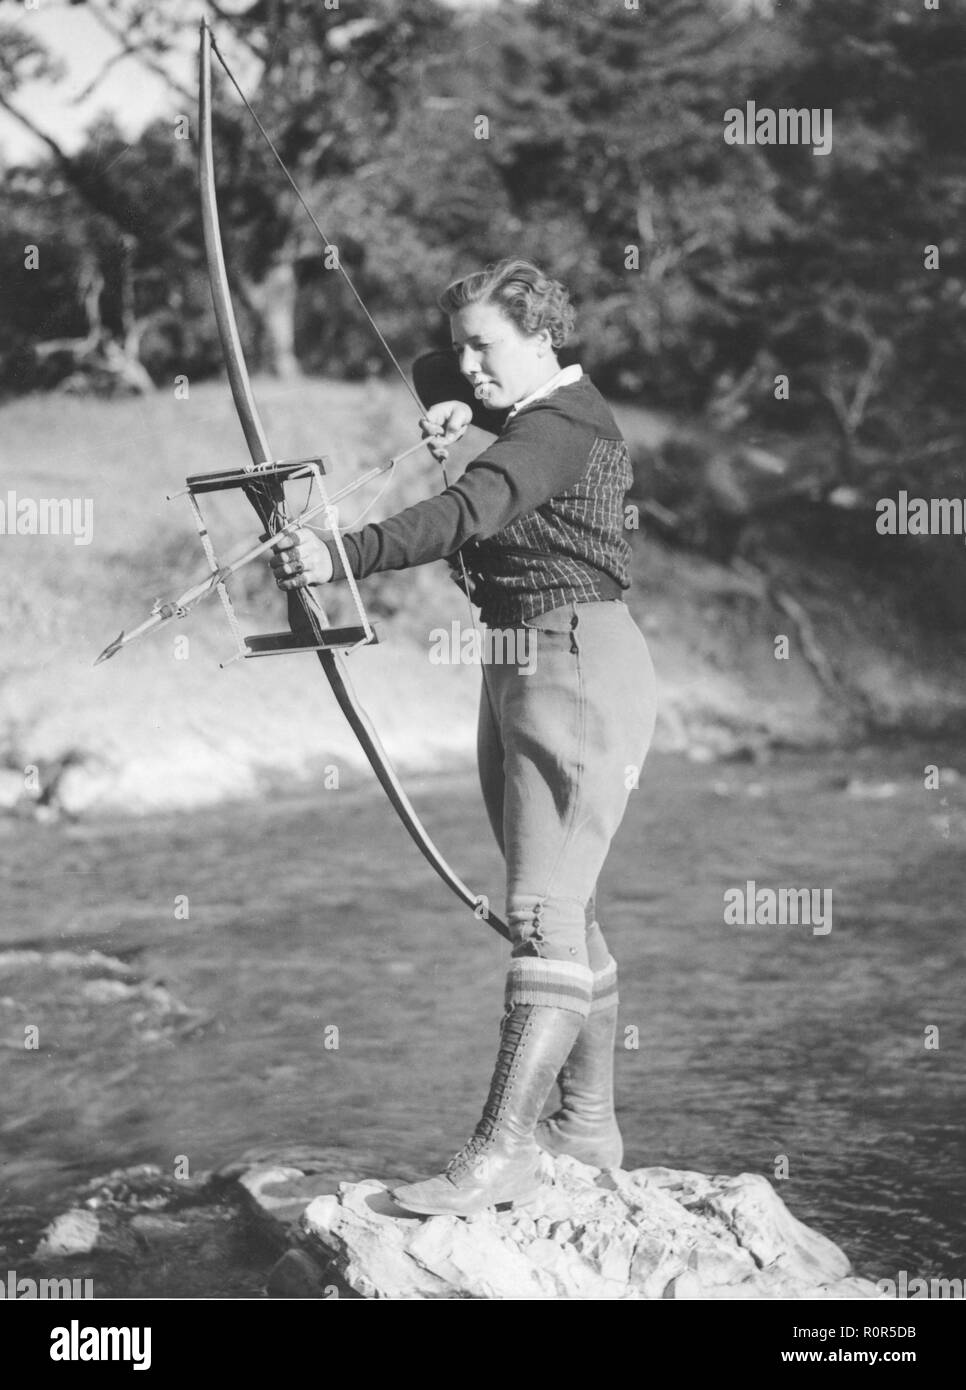 Women archer in the 1930s. A women uses her bow and arrow to catch fish and looks as if she is aiming to something in the stream. 1935 Stock Photo